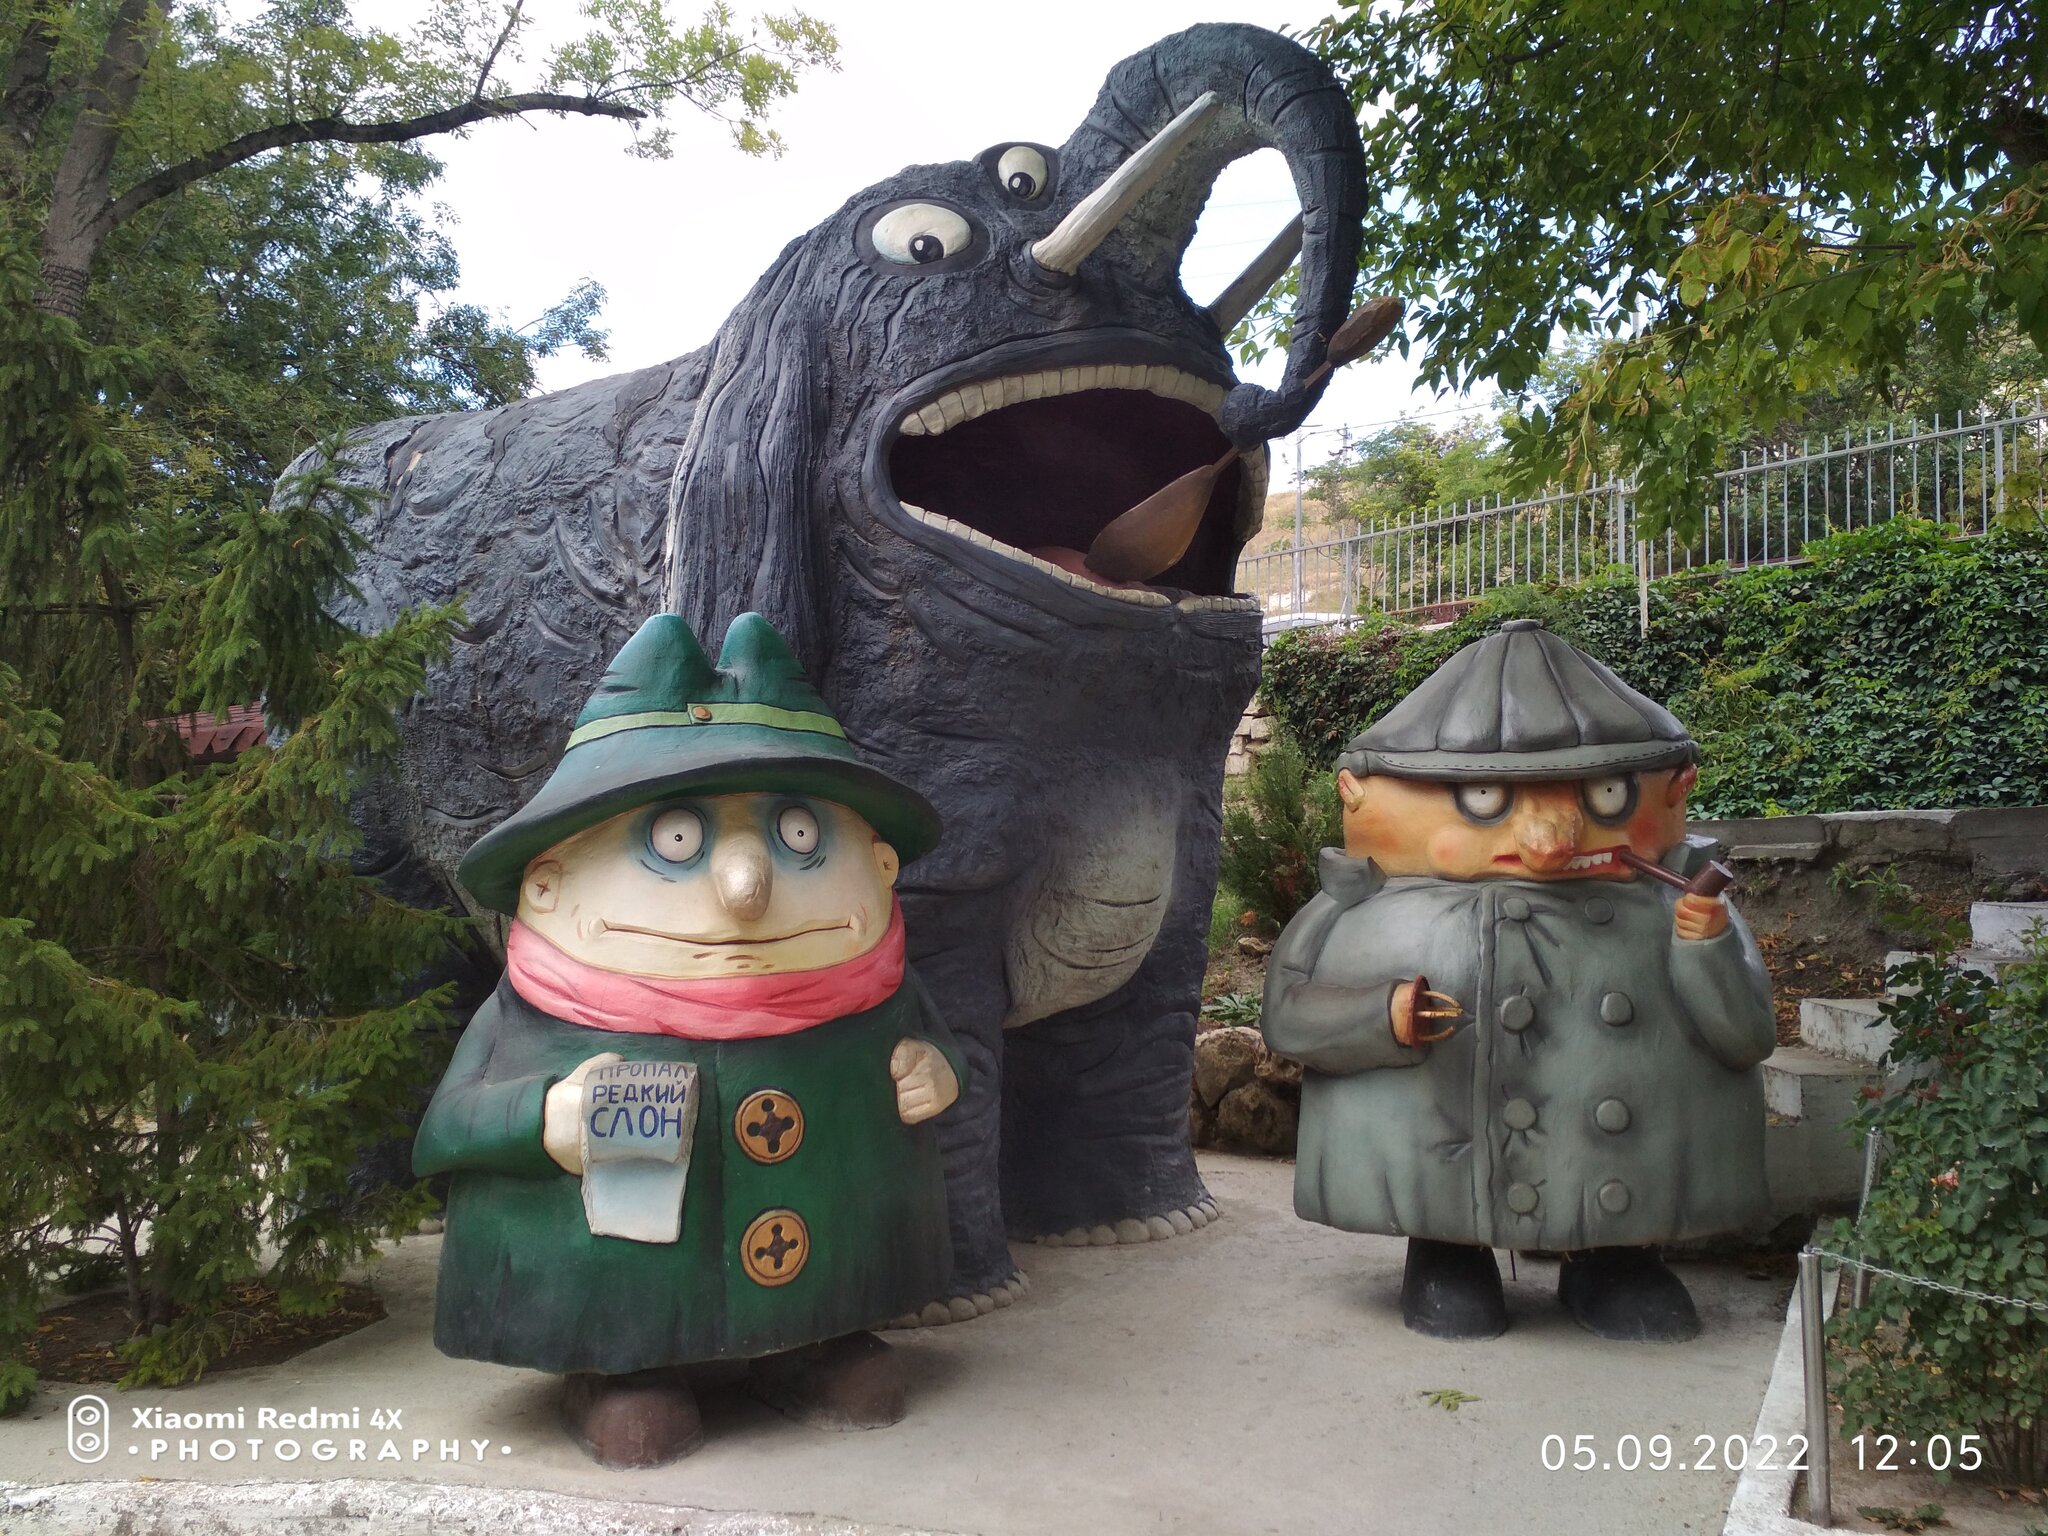 Got into a fairy tale - Travel across Russia, Sculpture, Characters (edit), Longpost, The investigation is being conducted by koloboks, Cheburashka, Leopold the Cat, Milota, The park, Cartoon characters, Soviet cartoons, Cartoons, Cyclist, Bakhchisarai, Travels, Story, Crimea, My